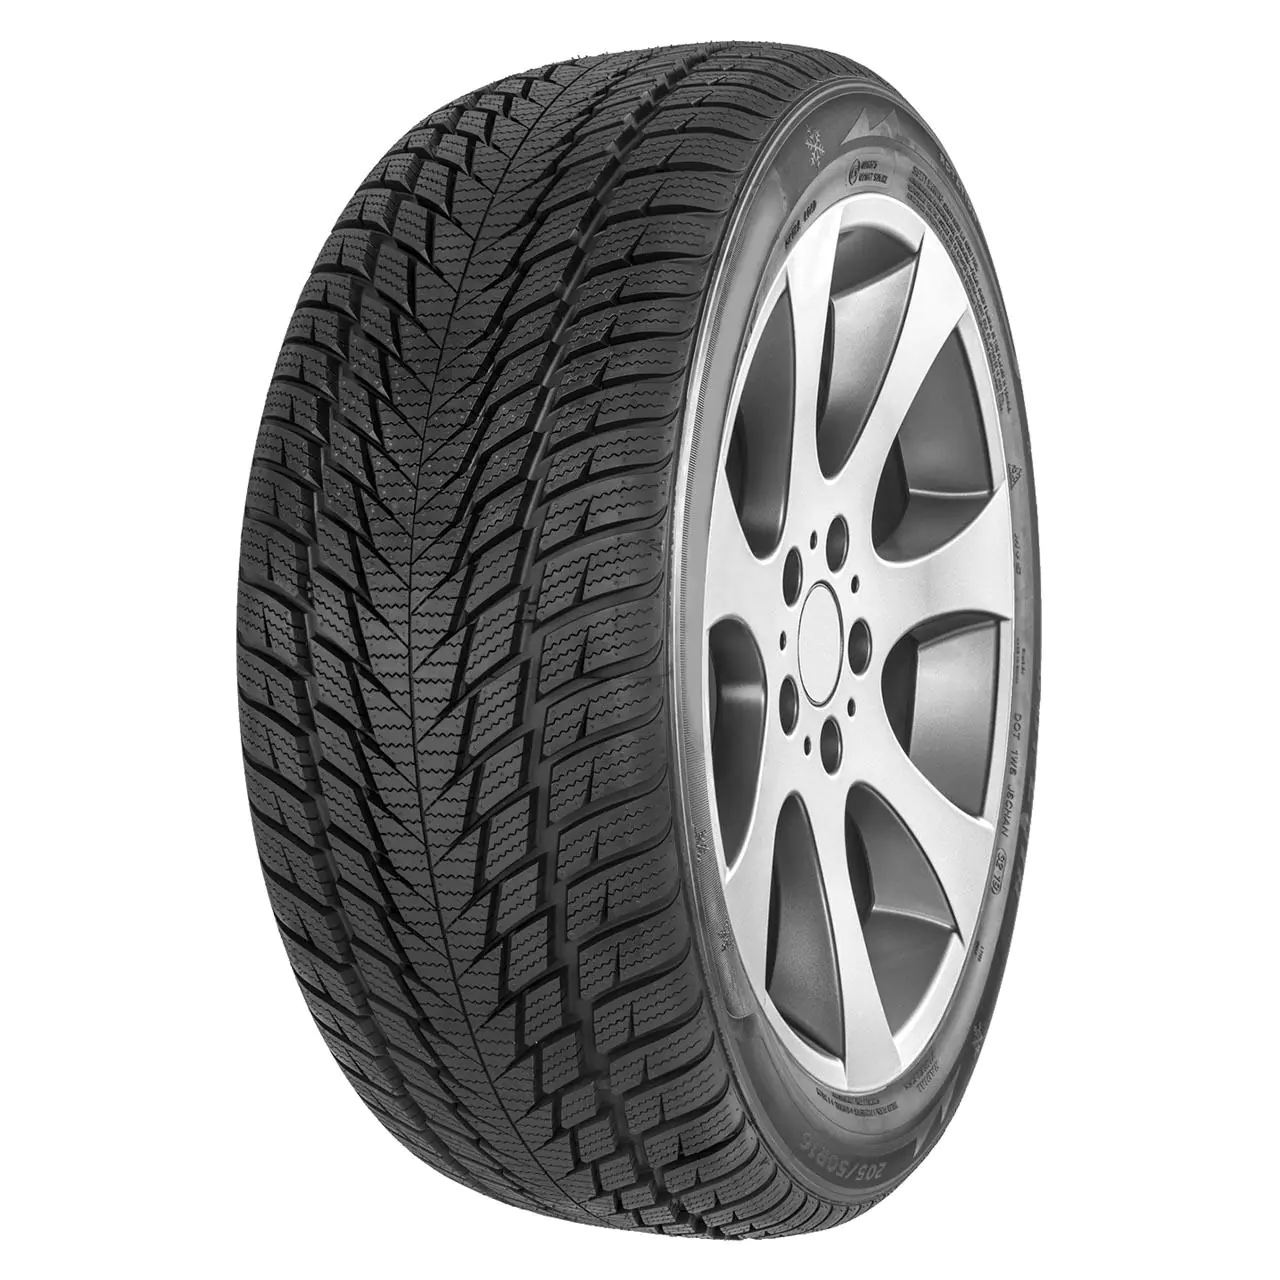 Gomme Autovettura Fortuna 225/35 R19 88V GOWIN UHP3 XL M+S Invernale